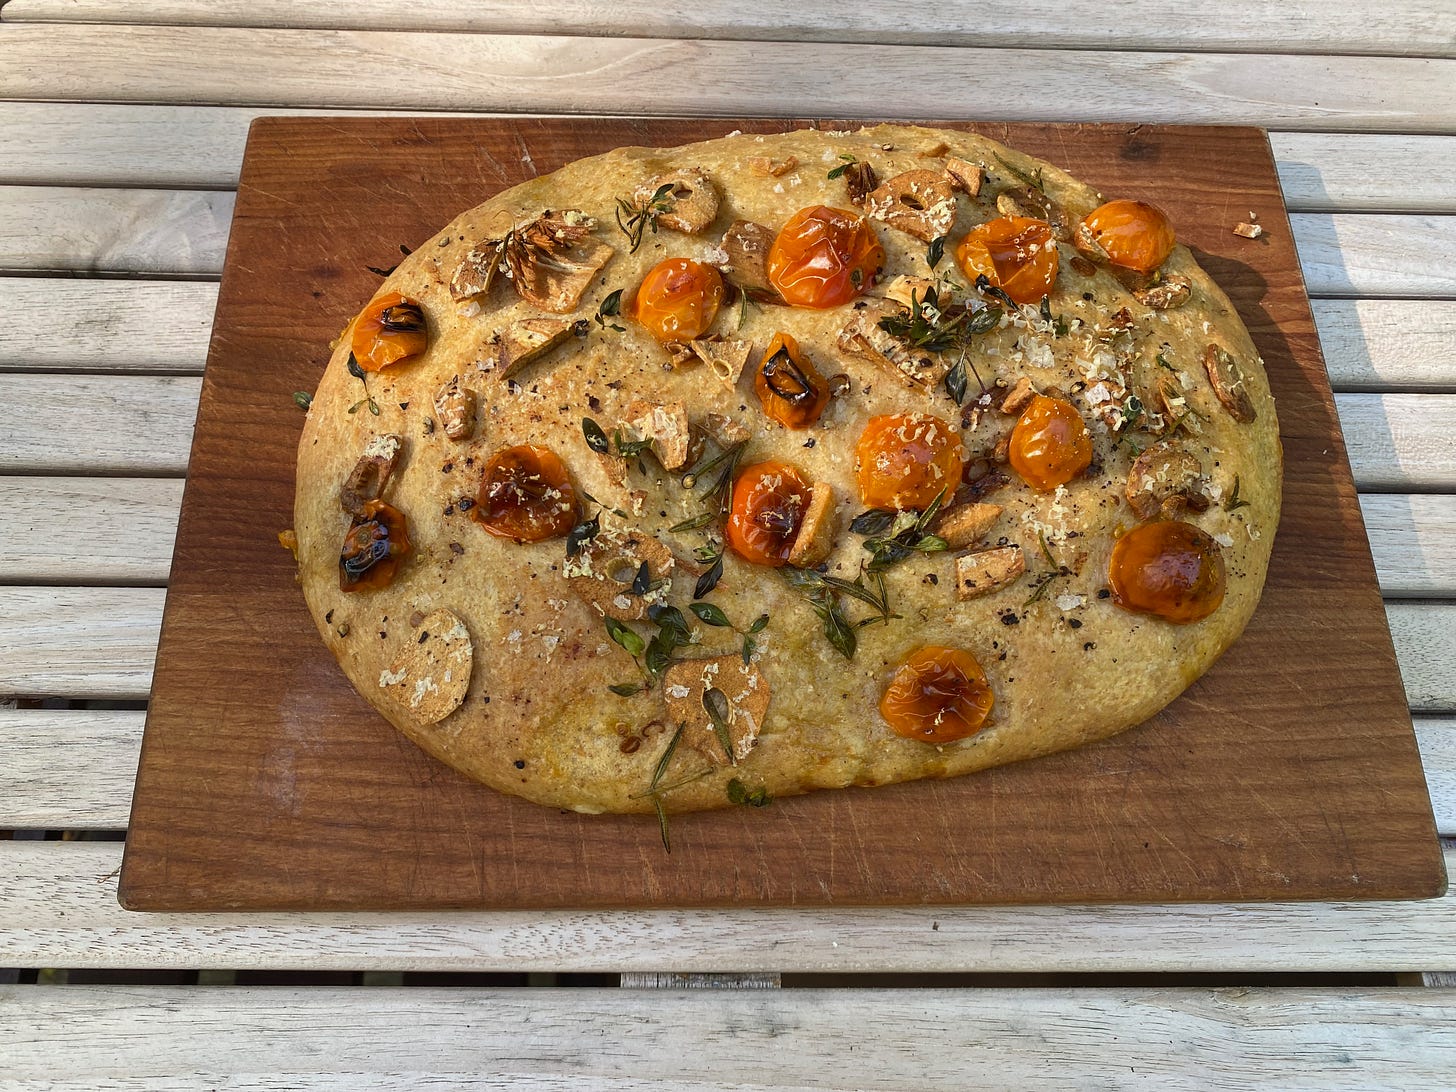 An oval focaccia loaf on a wooden cutting board. It’s topped with blistered cherry tomatoes, thinly sliced fried garlic, herb springs, and grated Parmesan.